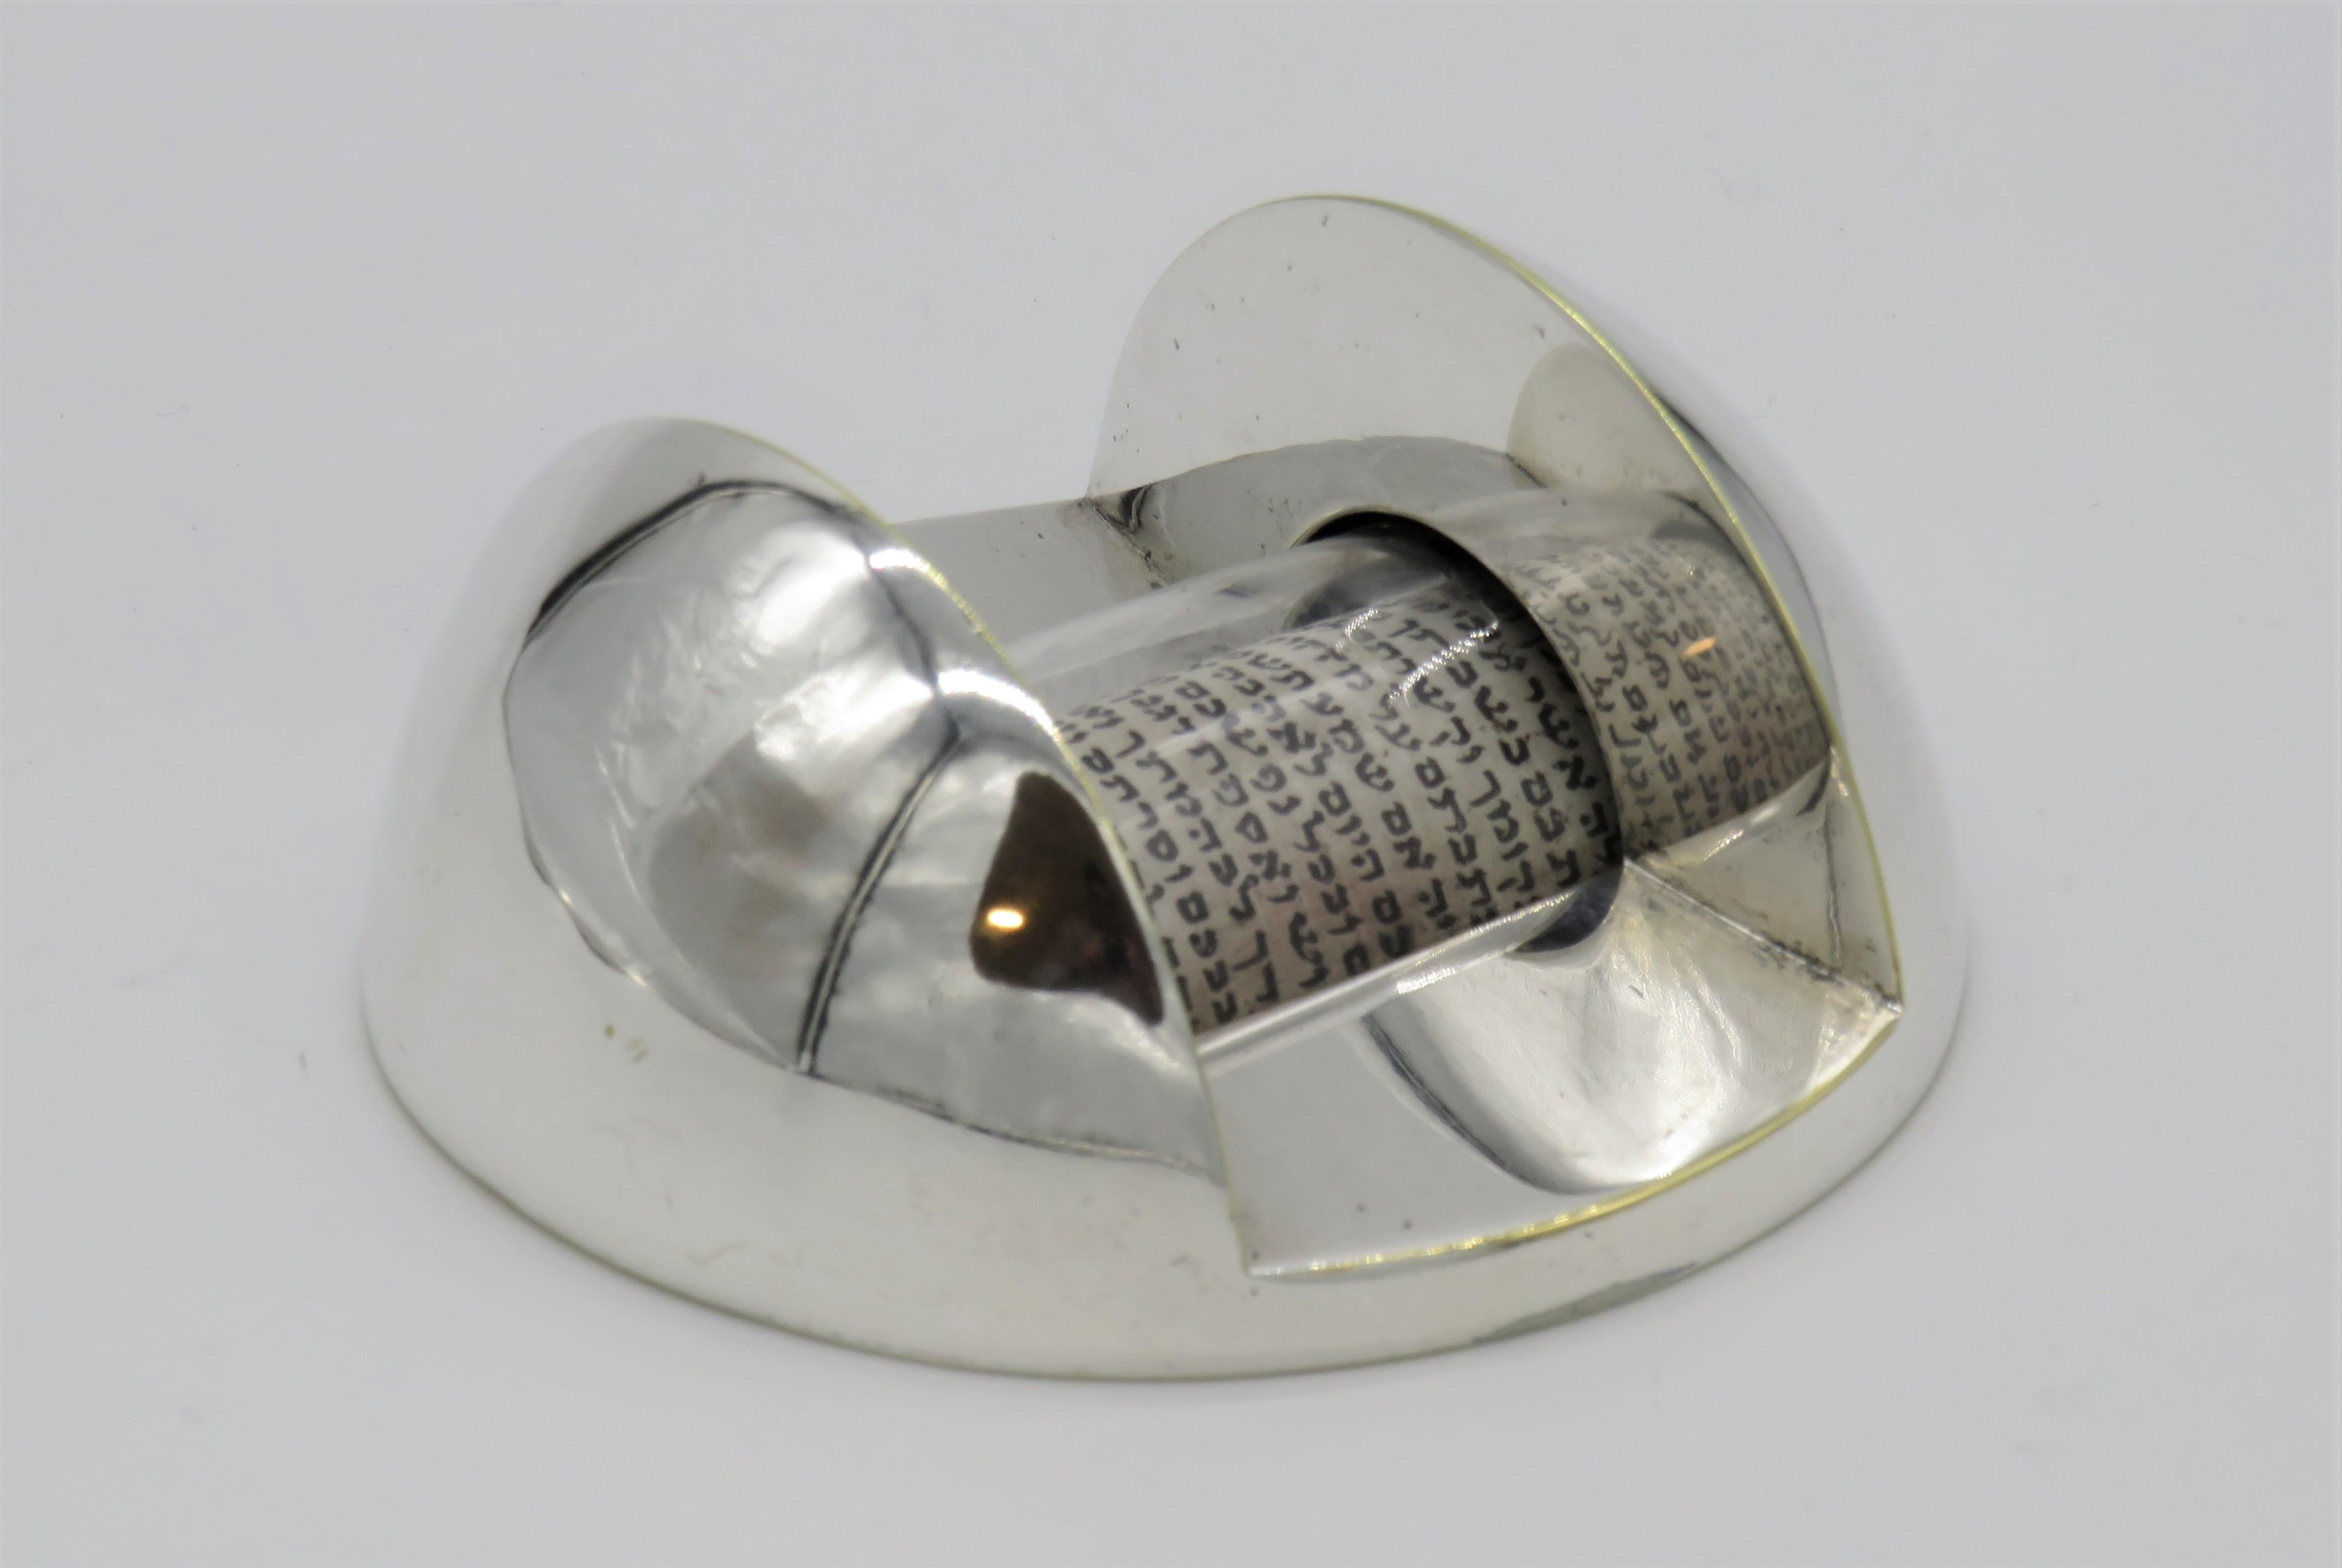 Modern silvered Mezuzah case by Dan Givon, Jerusalem, Israel, 1983.
The Bezalel Academy of Art has awarded the Raphael Prize for Design to this Mezuzah by Dan Givon. This unique shape allows us to actually see and read the beautiful prayer that is